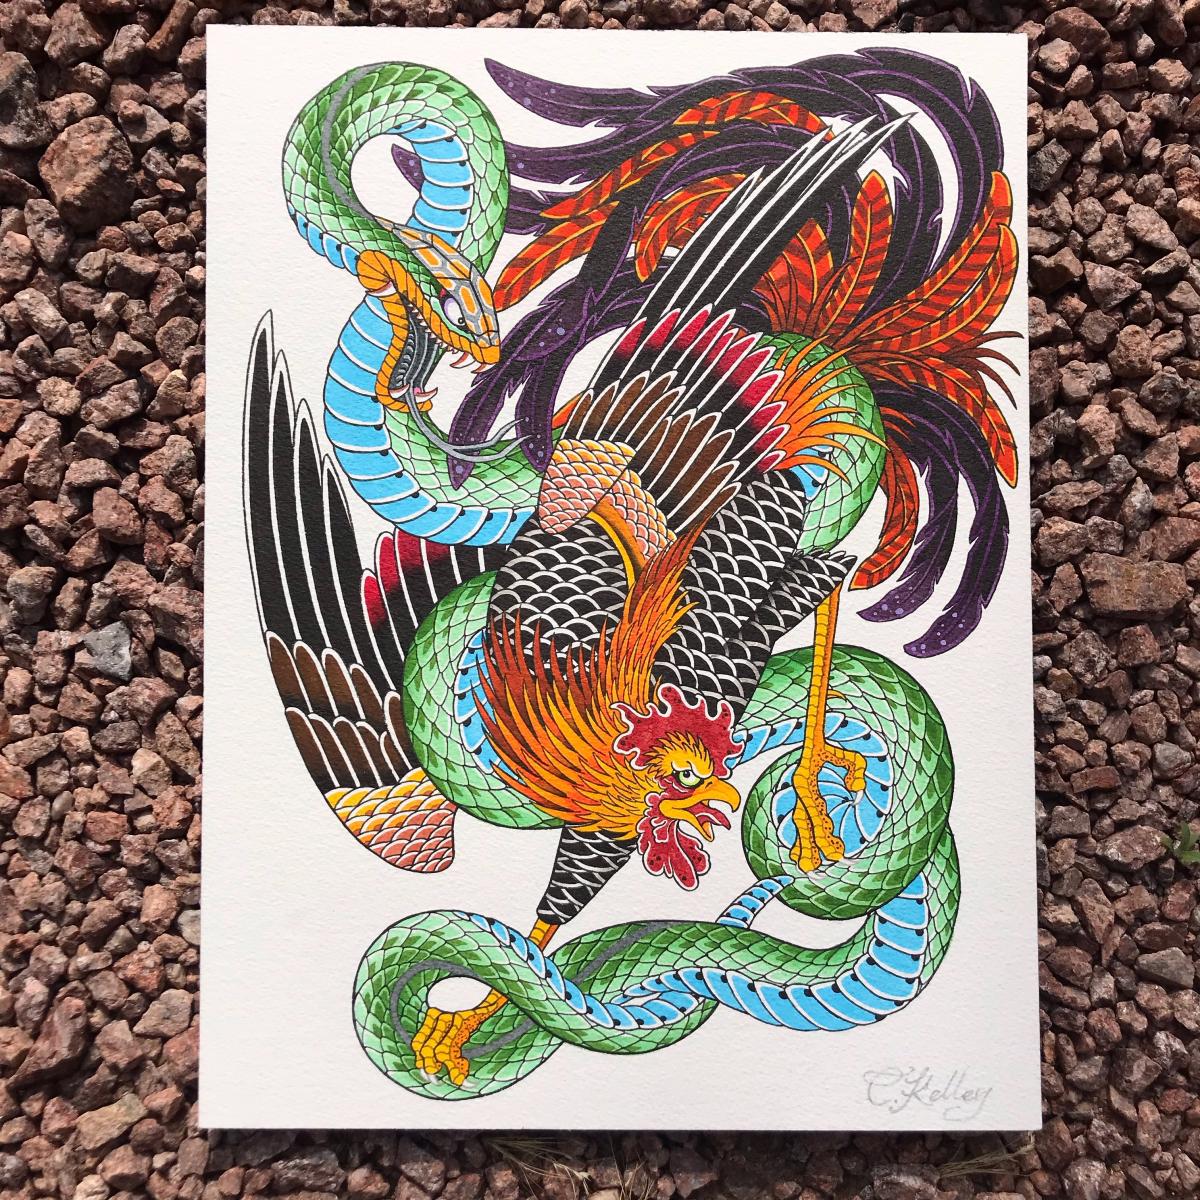 rooster snake fight by Cameron Kelley at Massive tattoo Las Vegas NV. IG- Cam.kelley